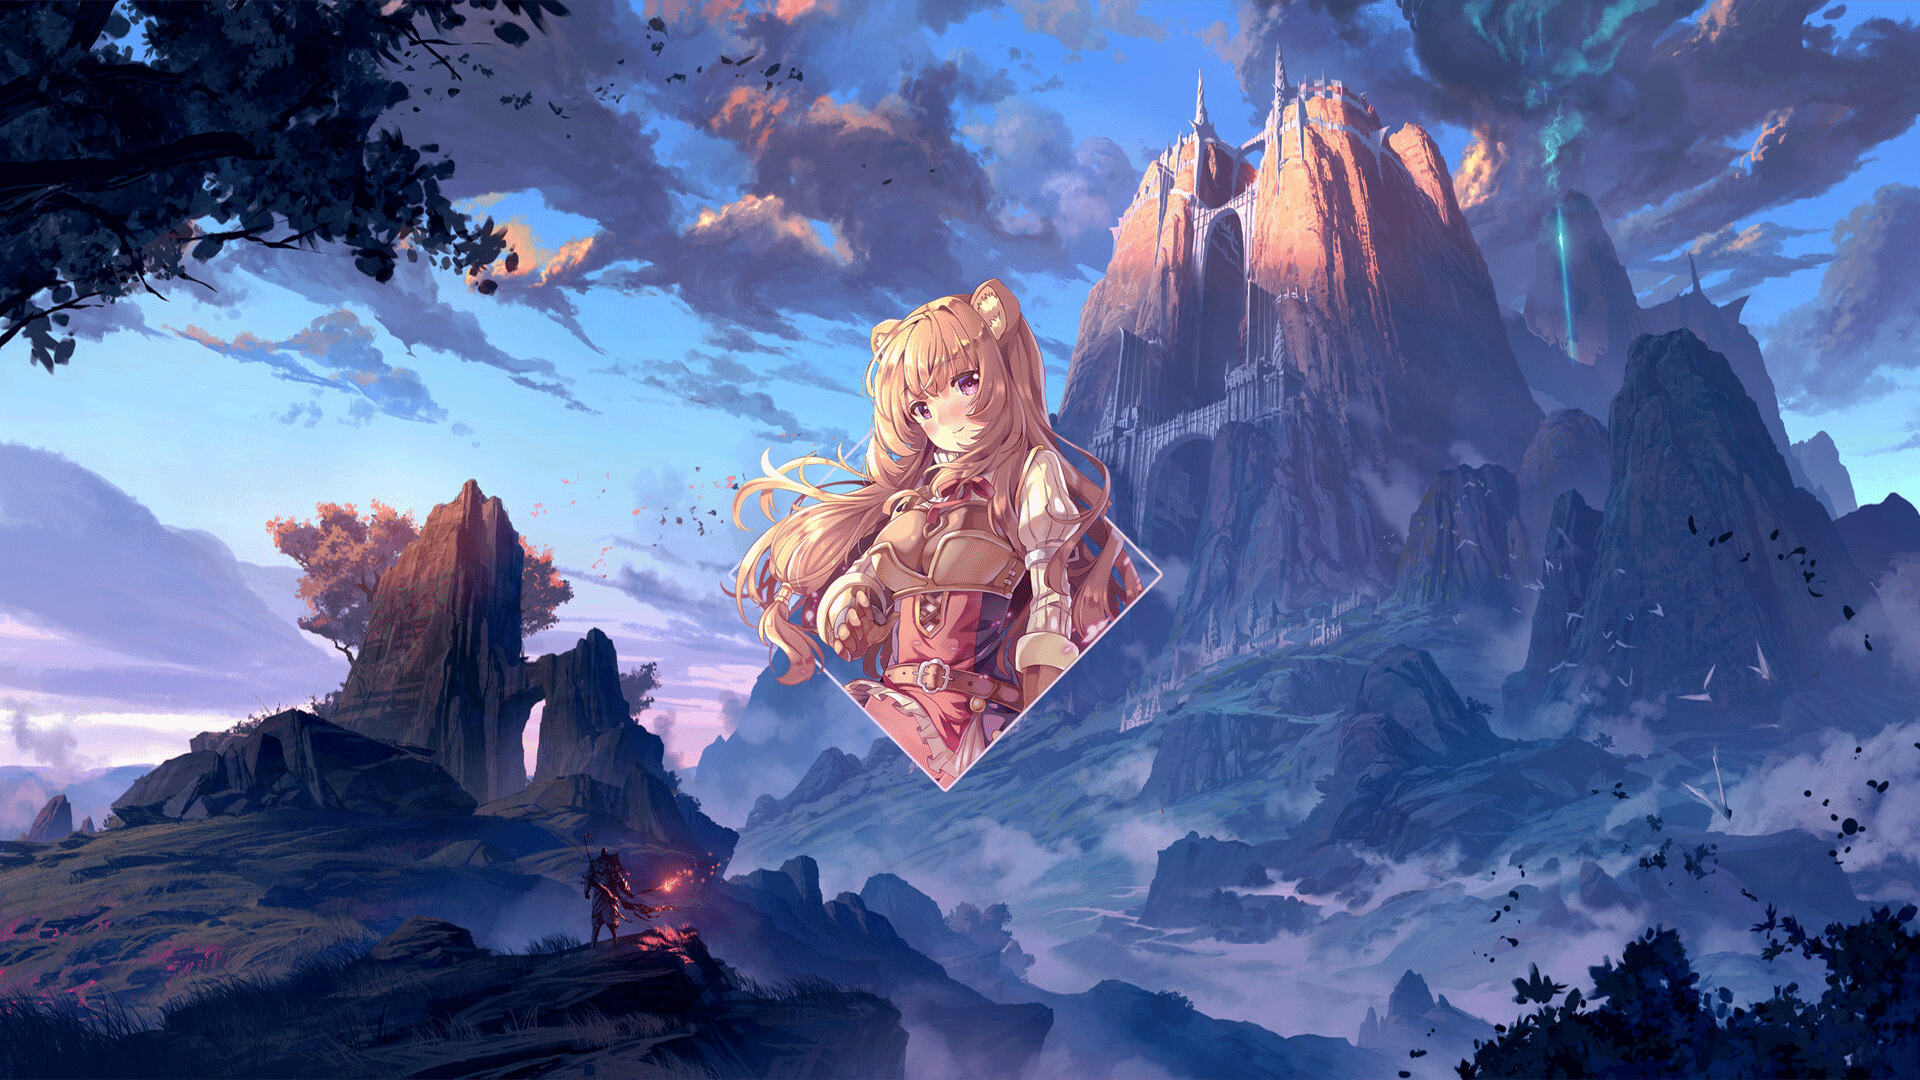 Anime Anime Girls Photoshop Platinum Conception Wallpapers Picture In Picture Digital Art Raphtalia 1920x1080